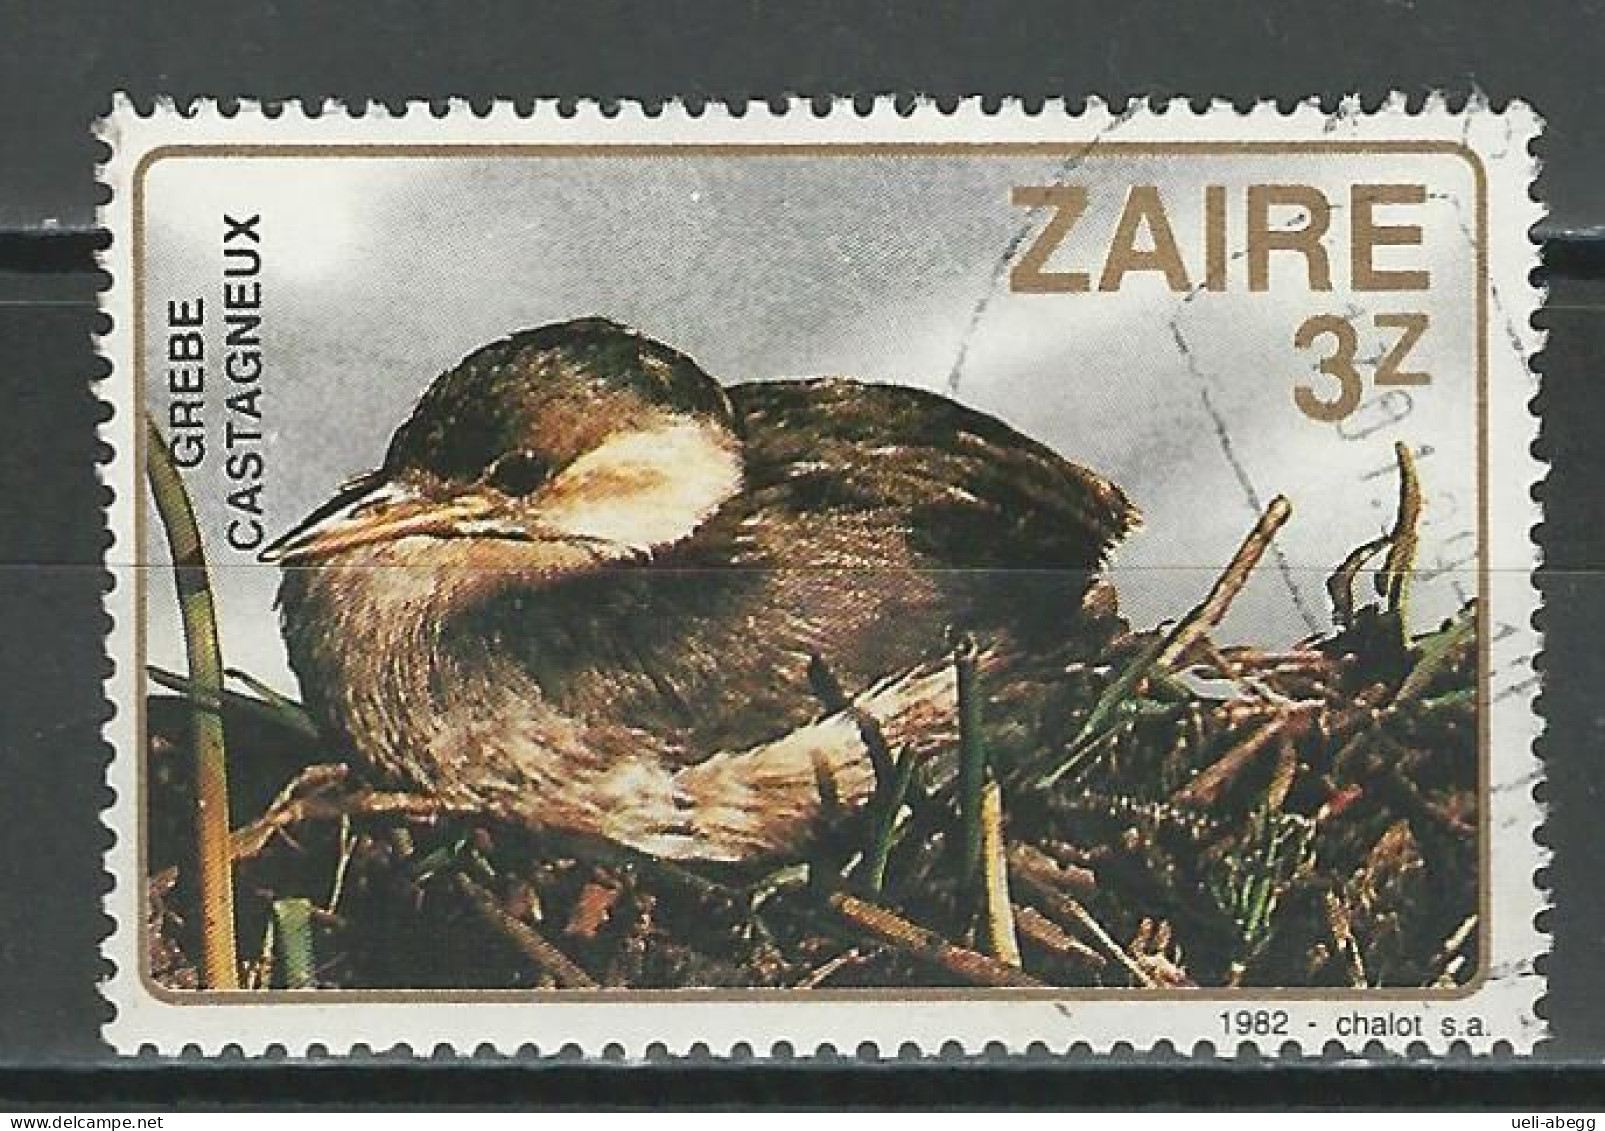 Zaire Mi 798 Used - Used Stamps